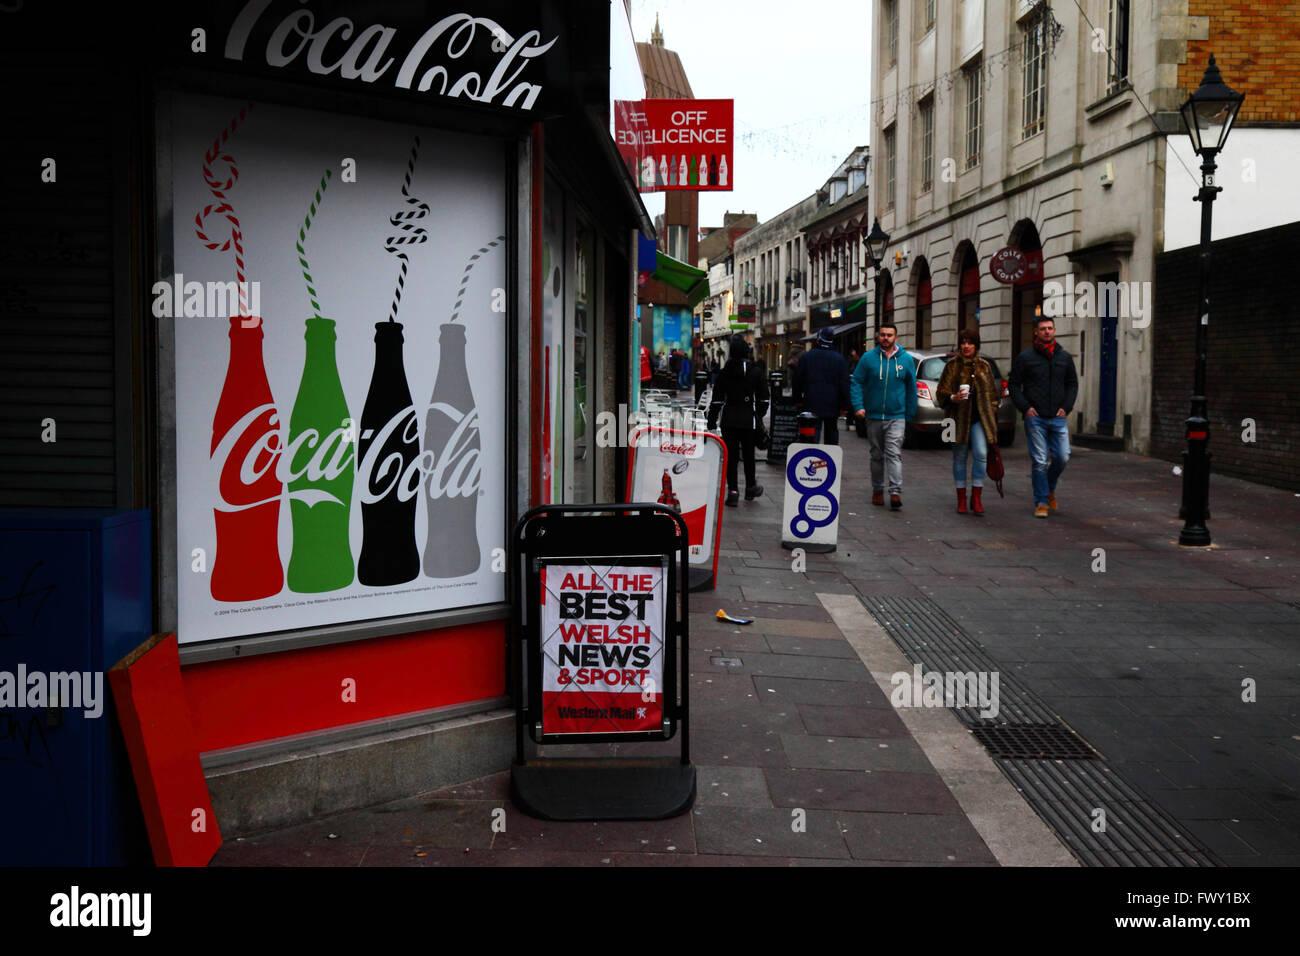 People walking past newsagents shop / off licence, Cardiff, South Glamorgan, Wales, United Kingdom Stock Photo